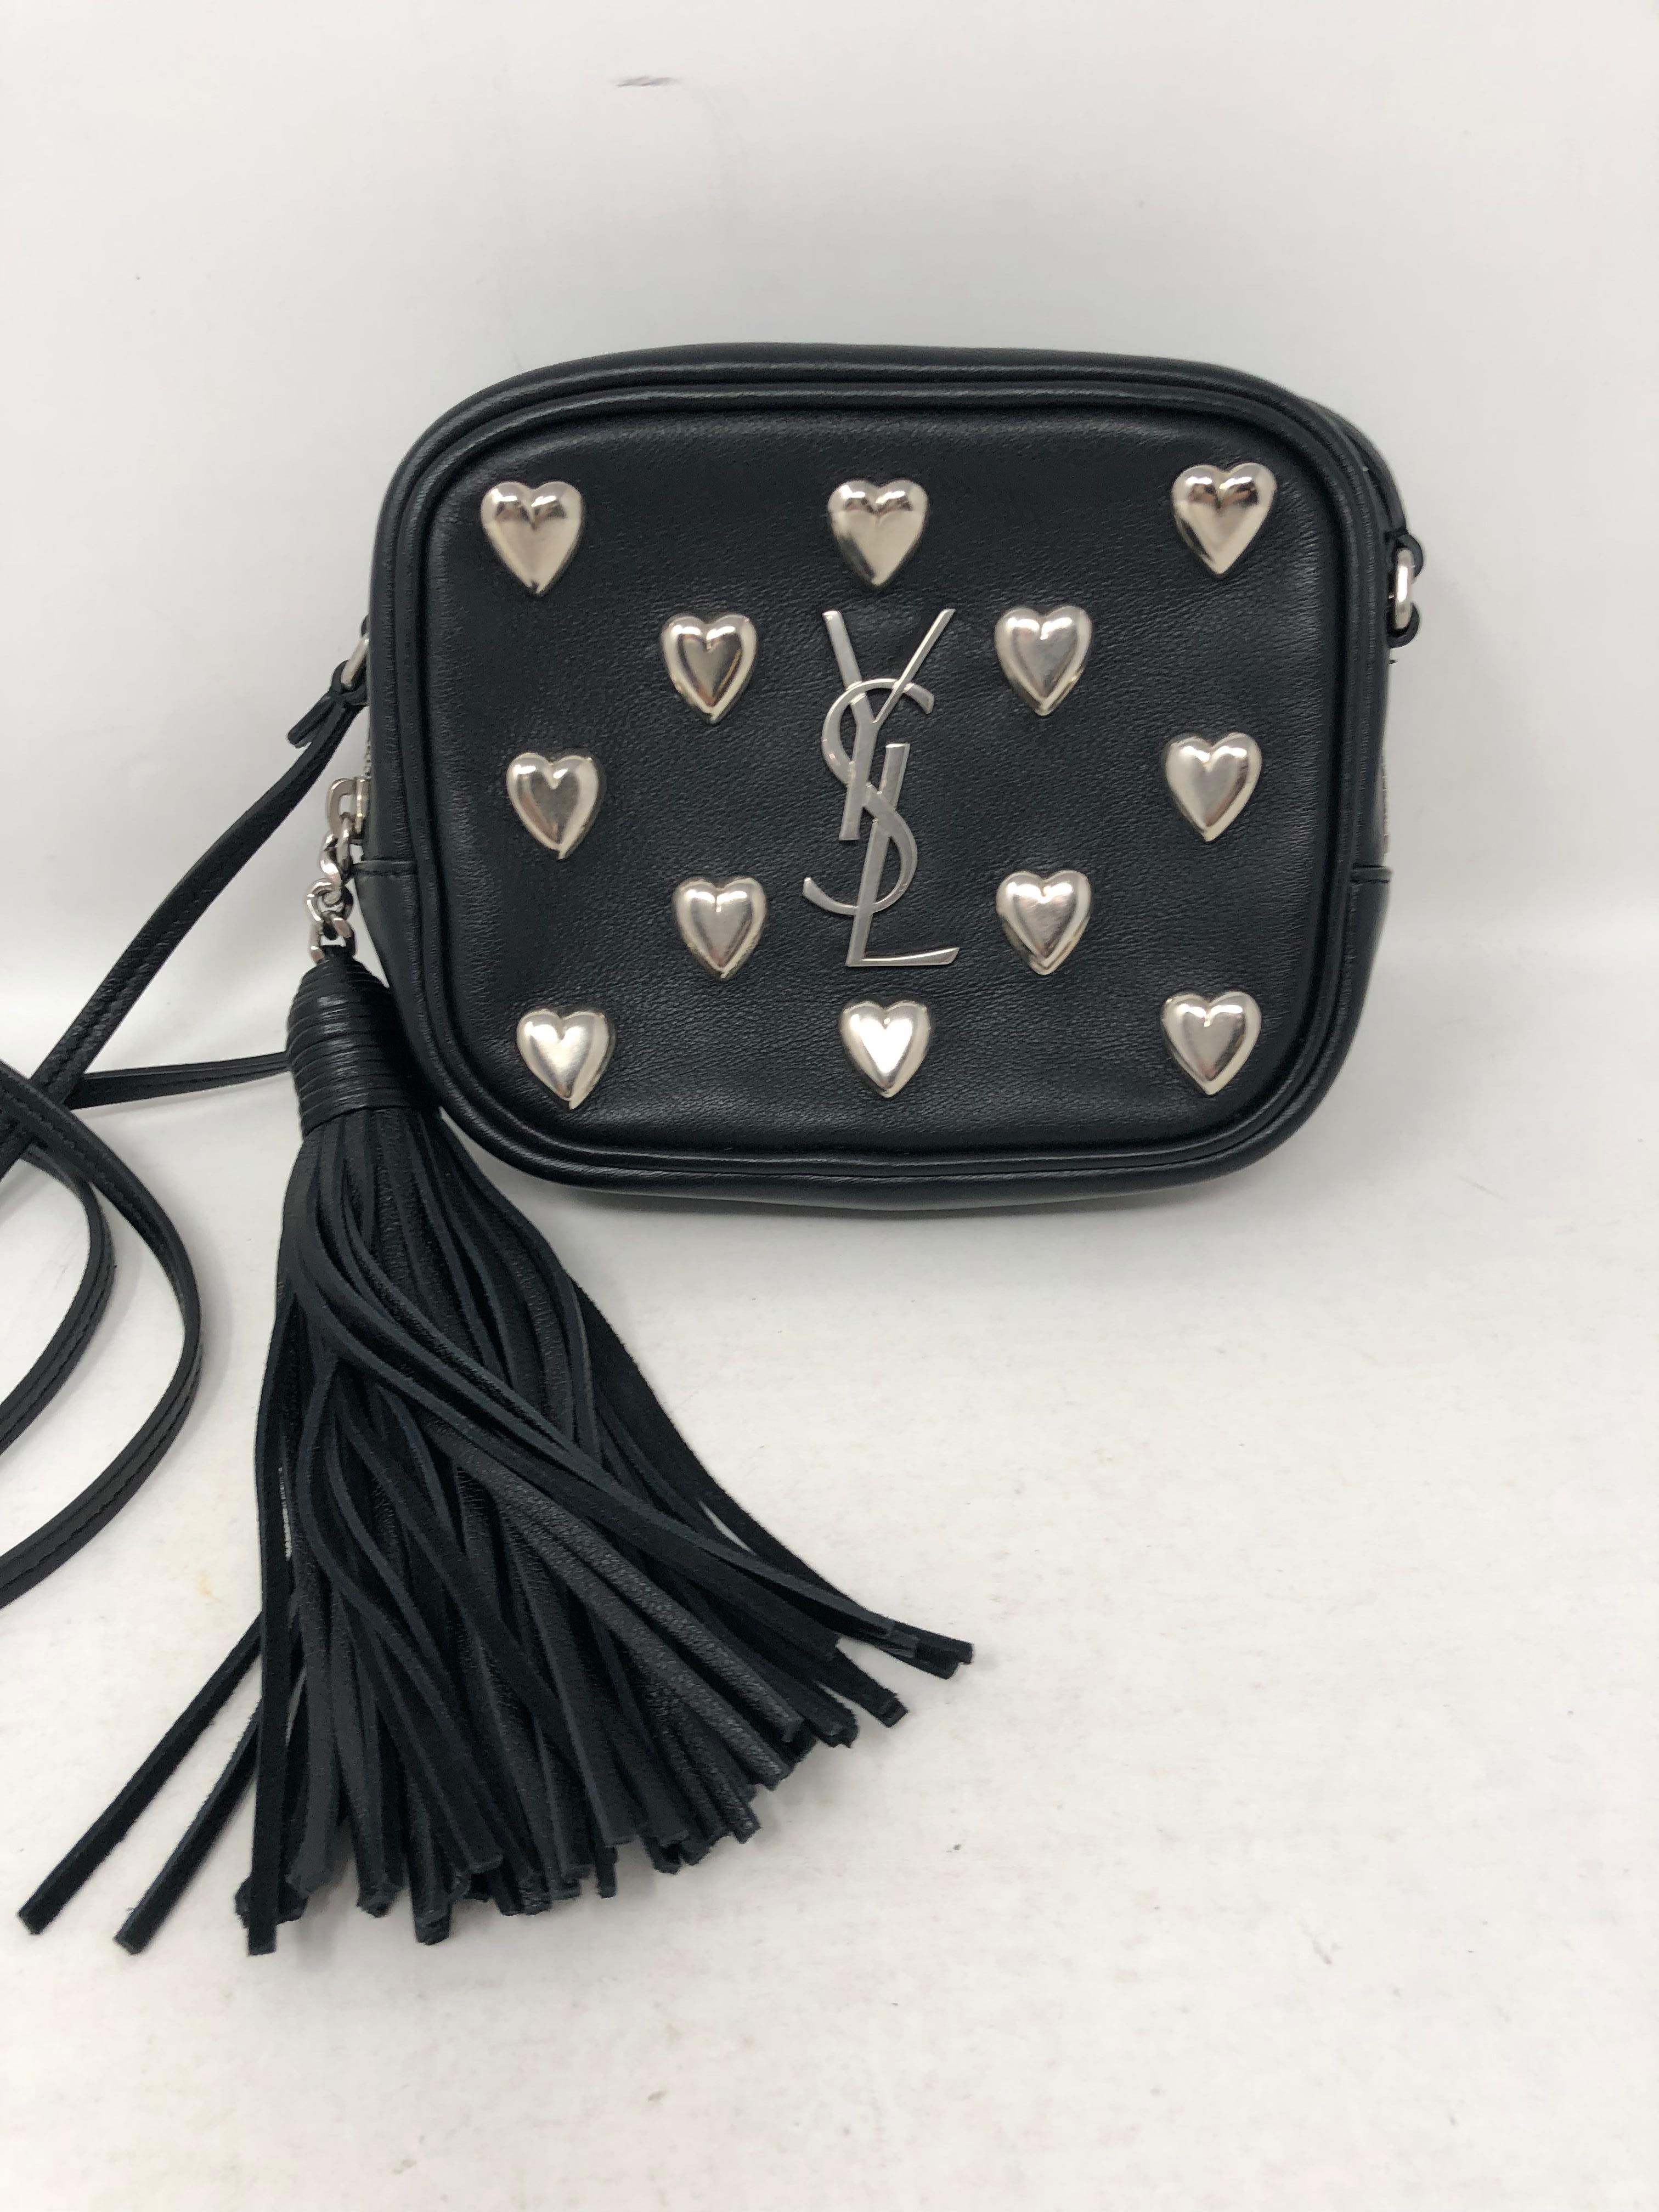 Yves Saint Laurent Black Mini with silver hearts crossbody bag. New condition. Cute tassel on side. All leather with silver studded hearts. Guaranteed authentic. 